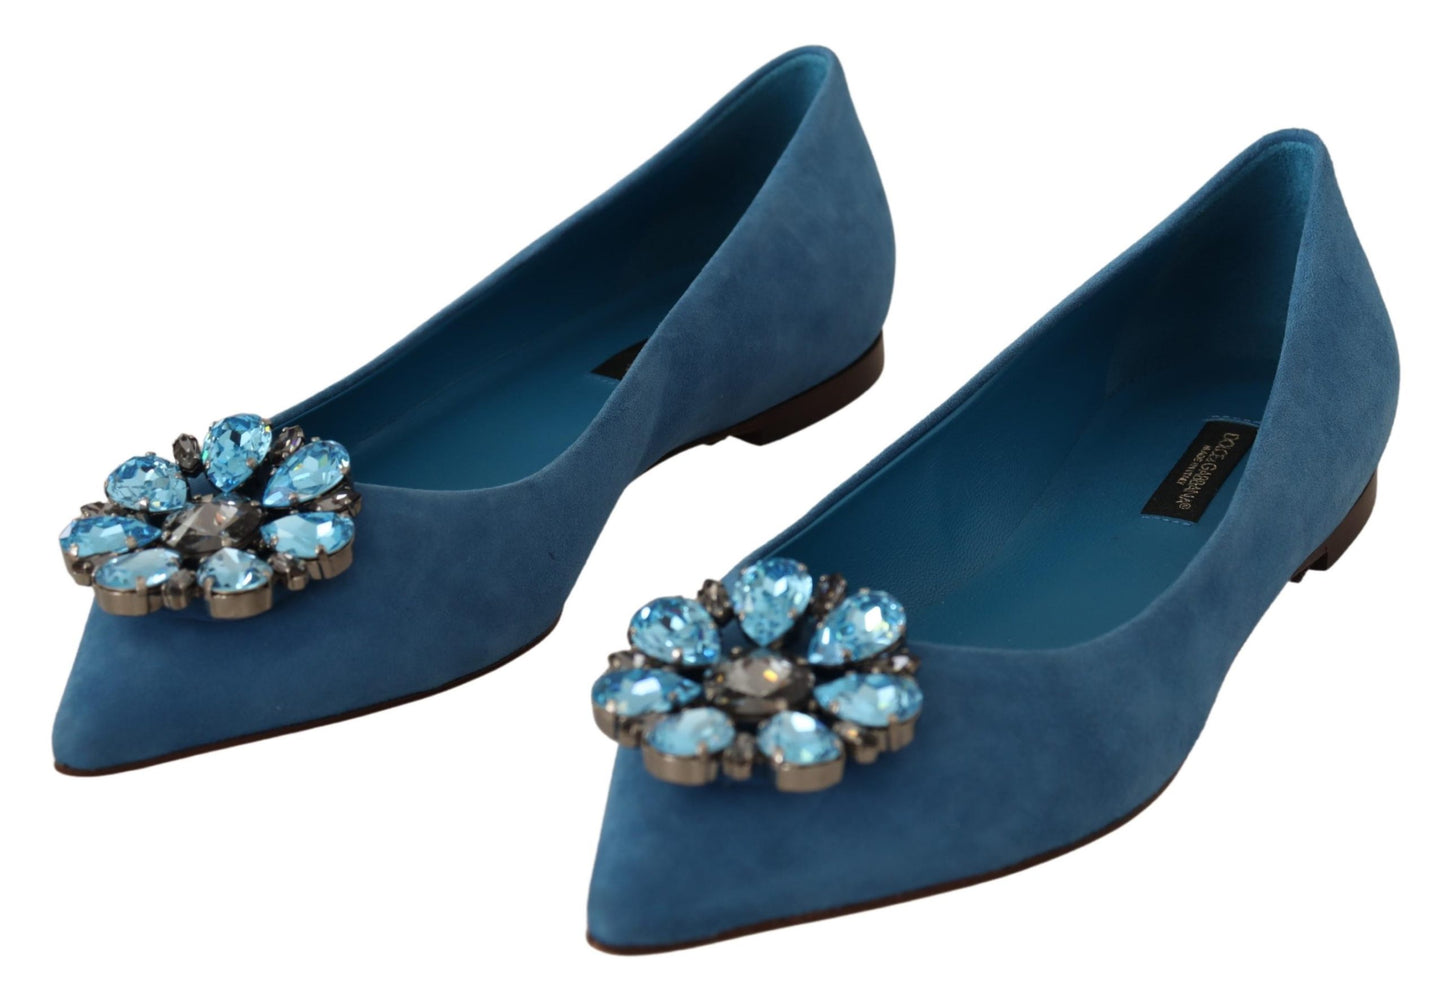 Dolce & Gabbana Blue Suede Crystals Loafers Flats Shoes - DEA STILOSA MILANO